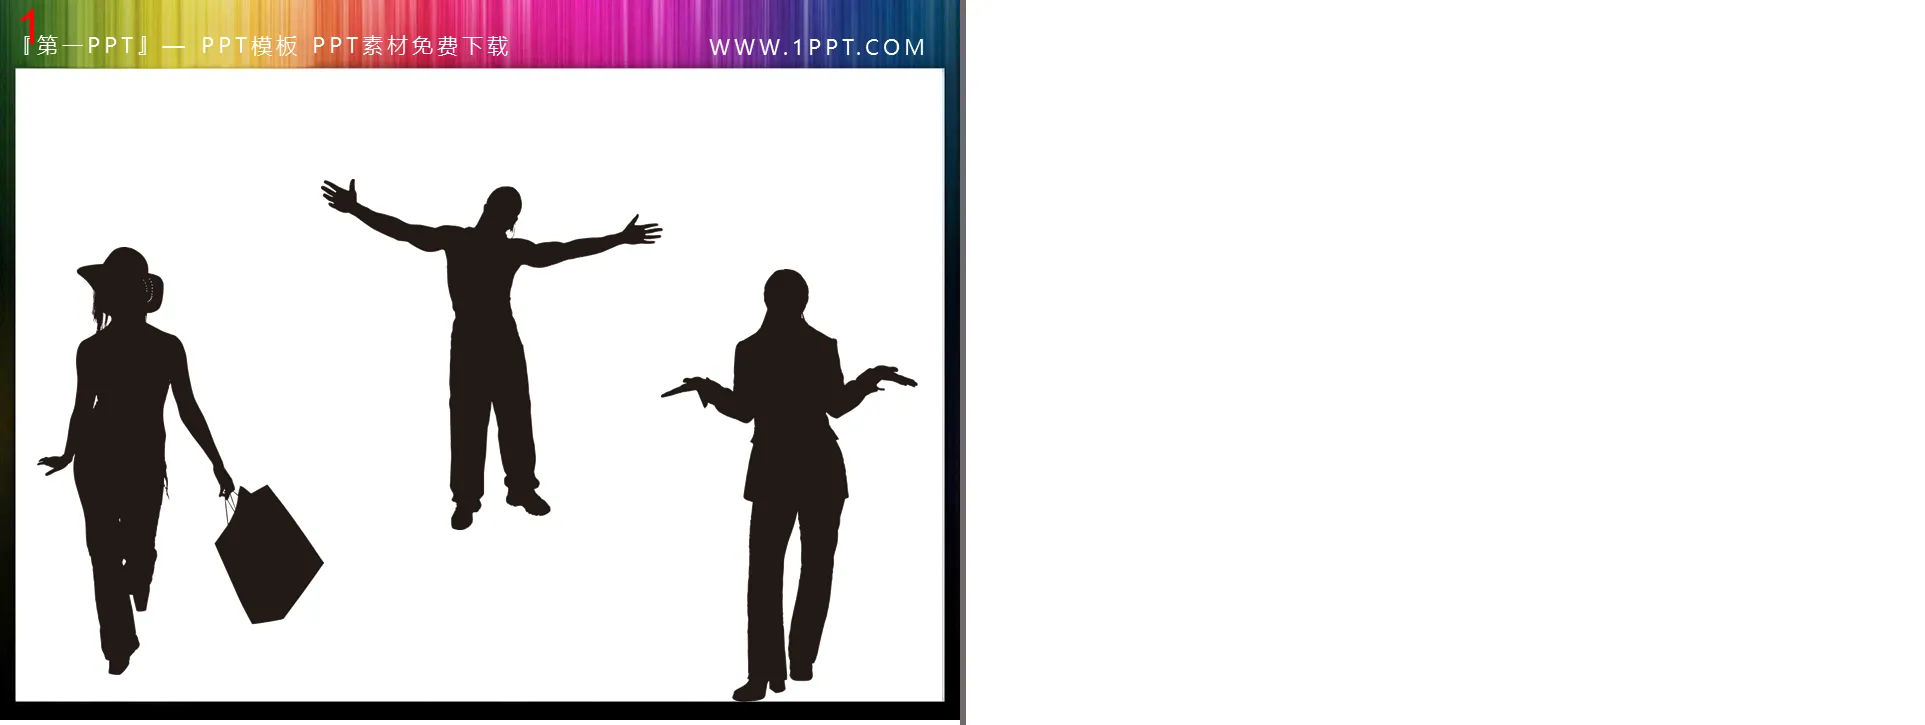 A group of people silhouette PowerPoint background material download